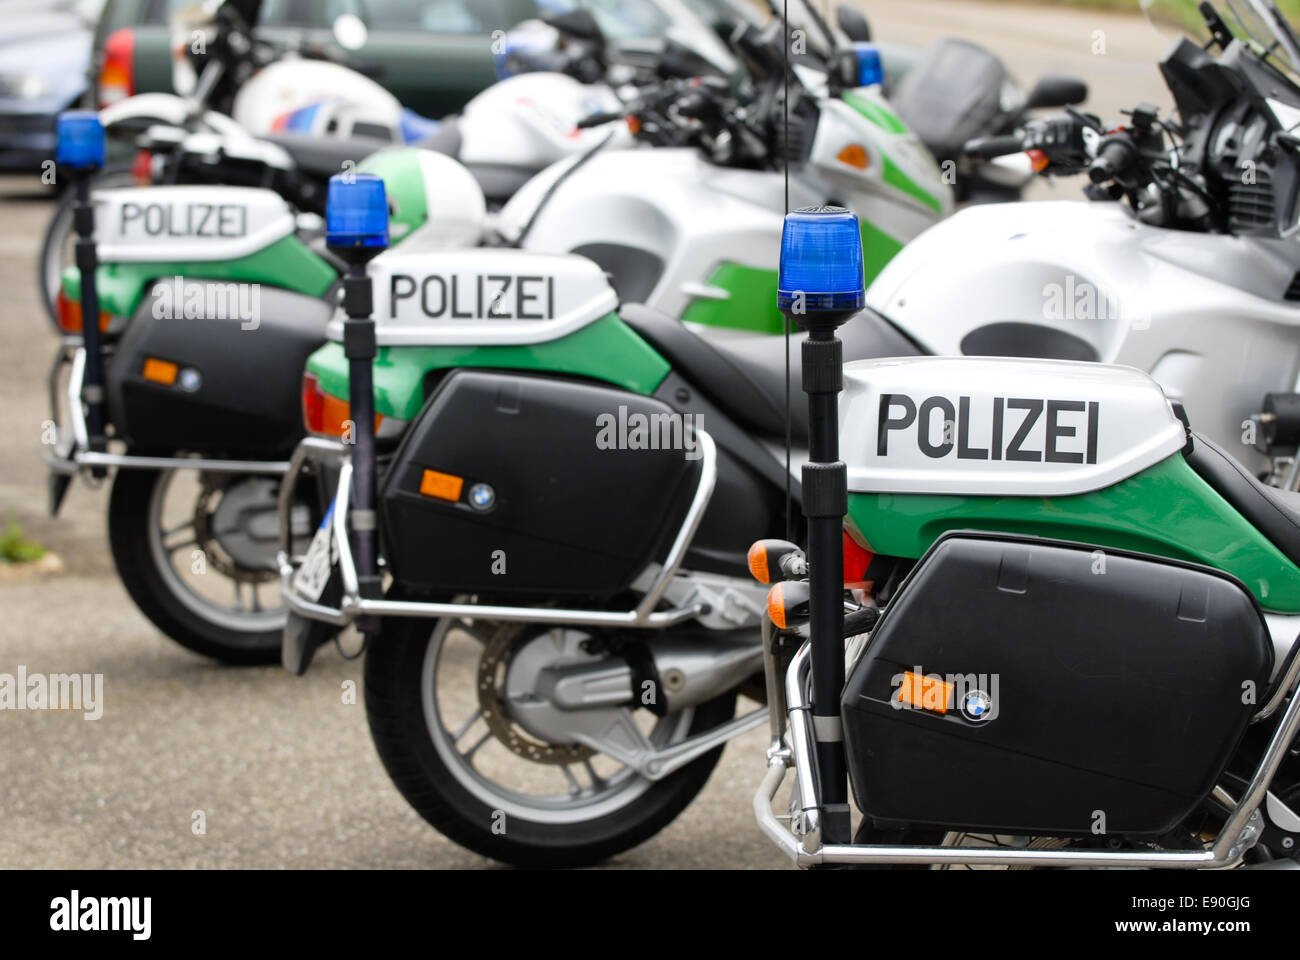 Police Motorcycles Stock Photo